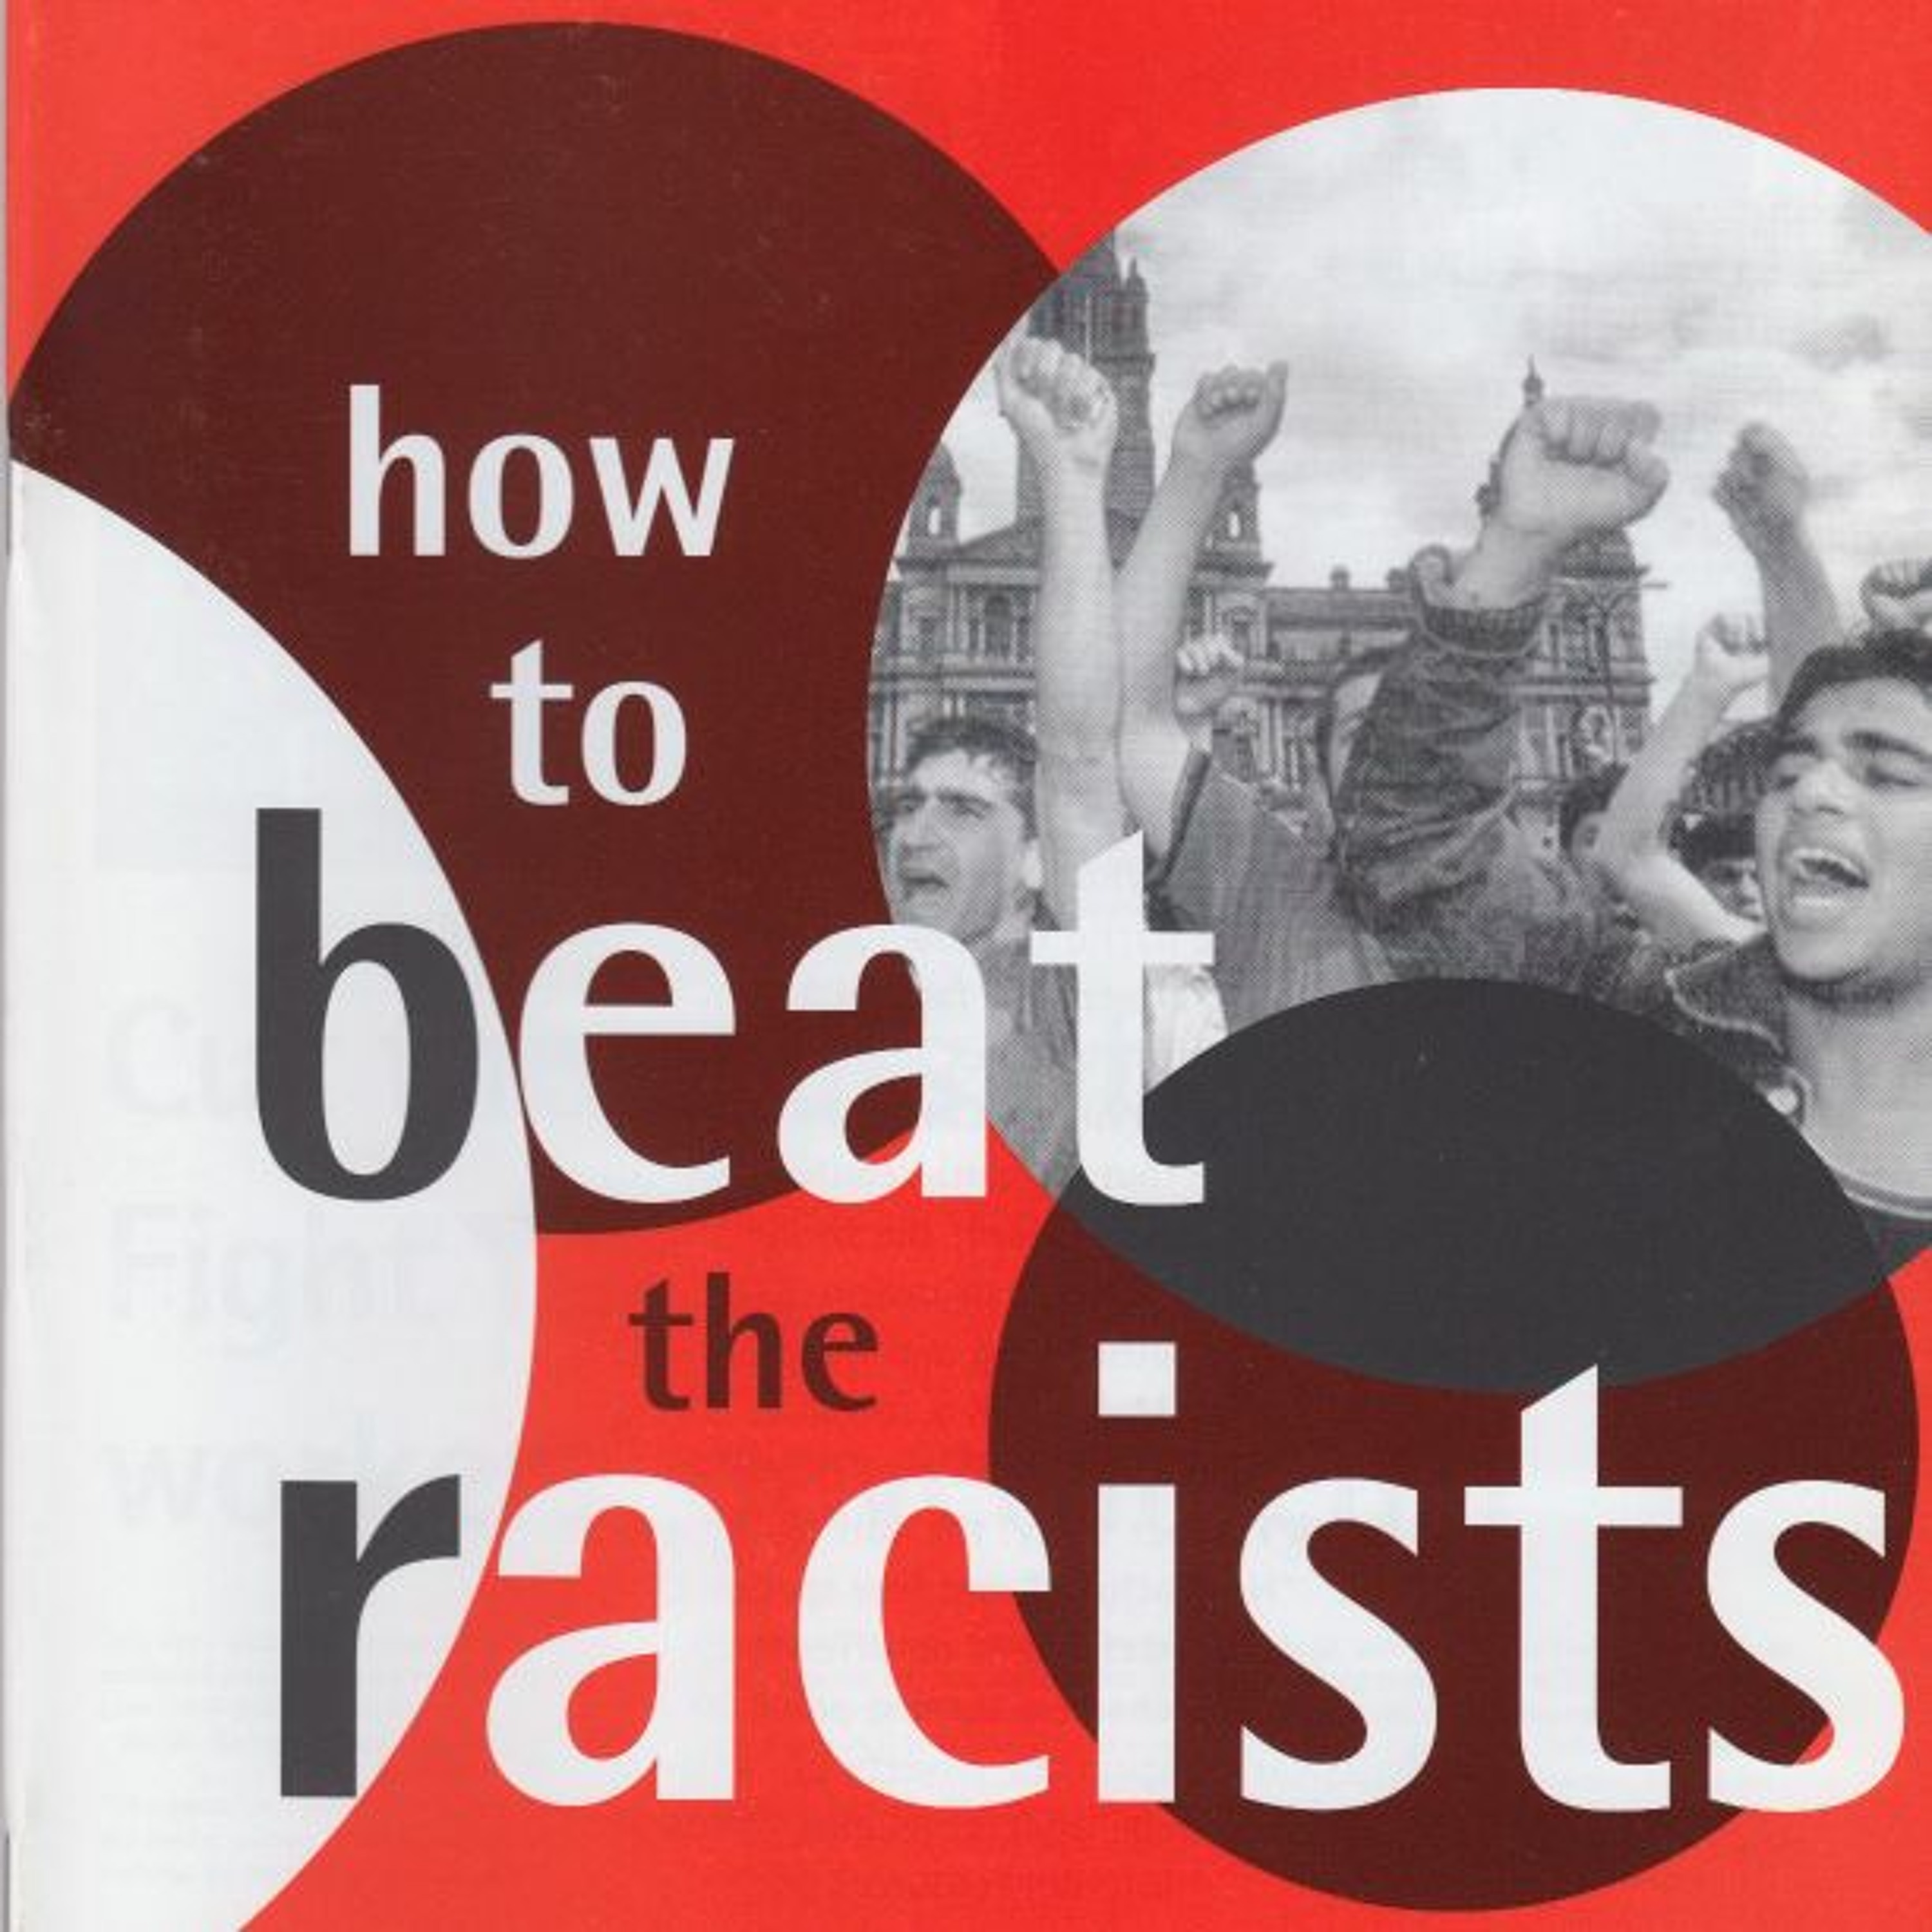 7 of 10 — How to beat the racists — Martin Luther King and Malcolm X